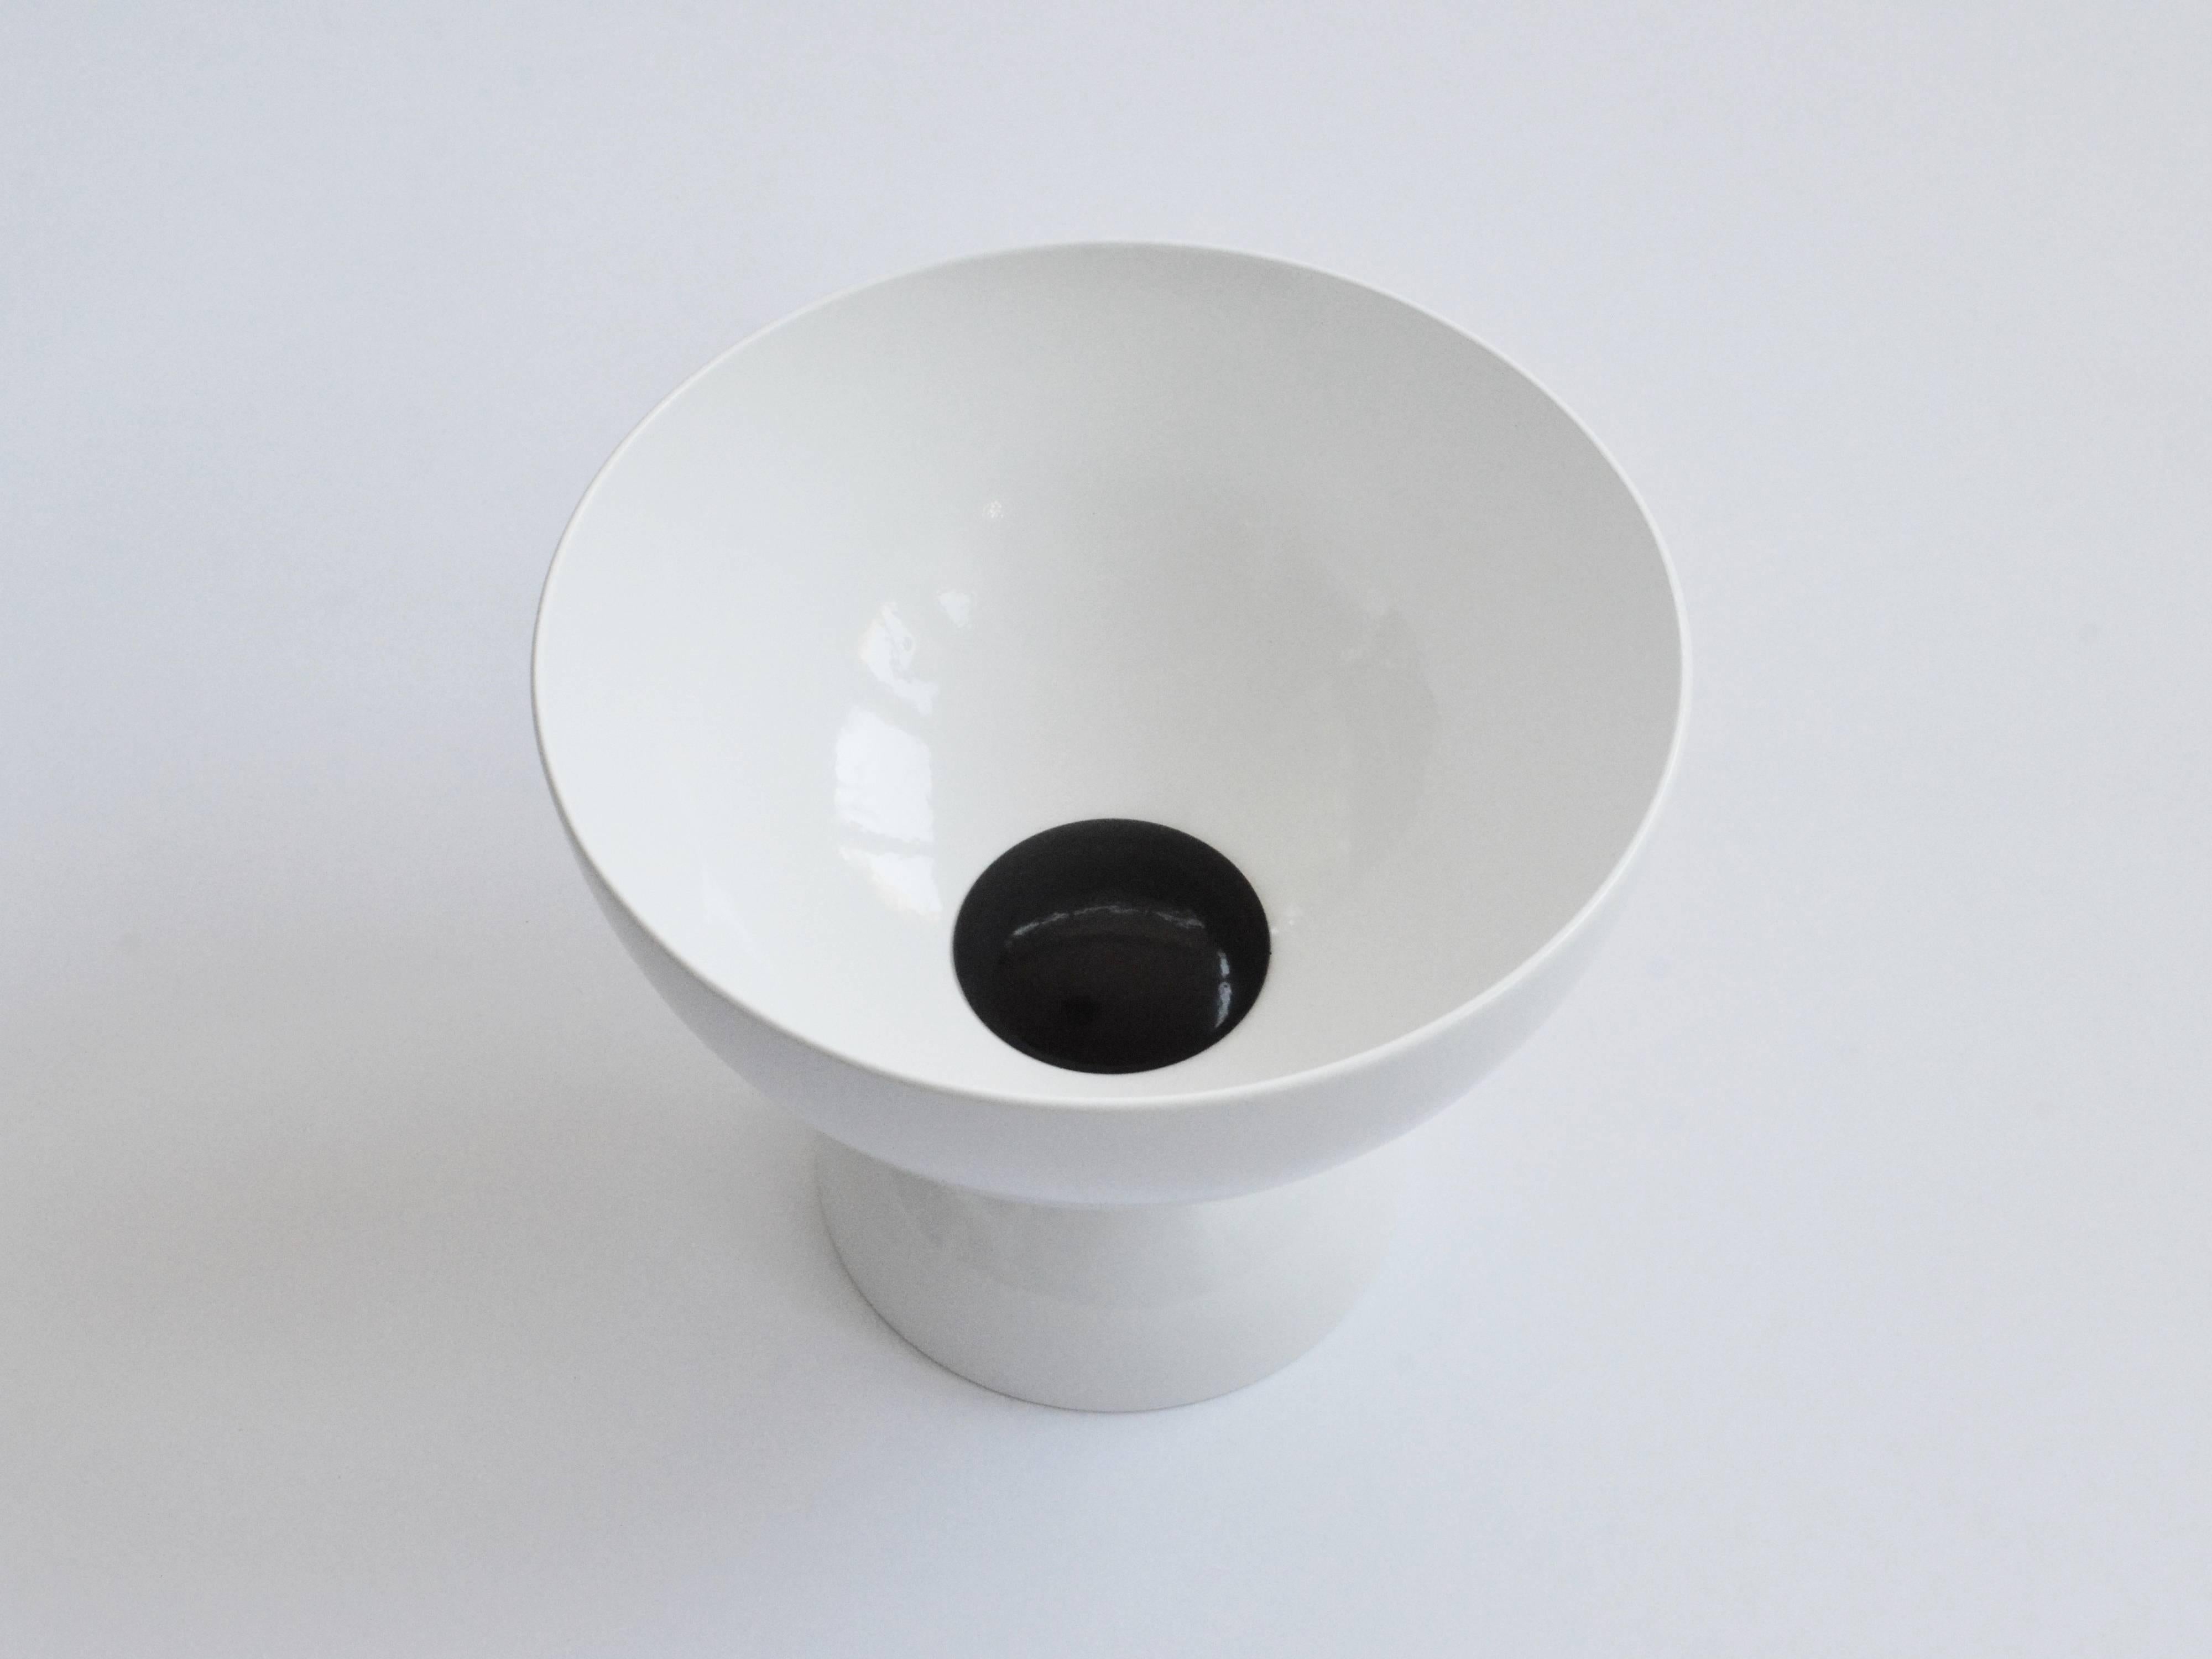 Contemporary bowl designed and made by independent product and furniture designer Connor Holland.

The Cassini Bowl is part of the Saturn Six range, a series of designs inspired by space exploration and the Saturn V rocket. The median of the three